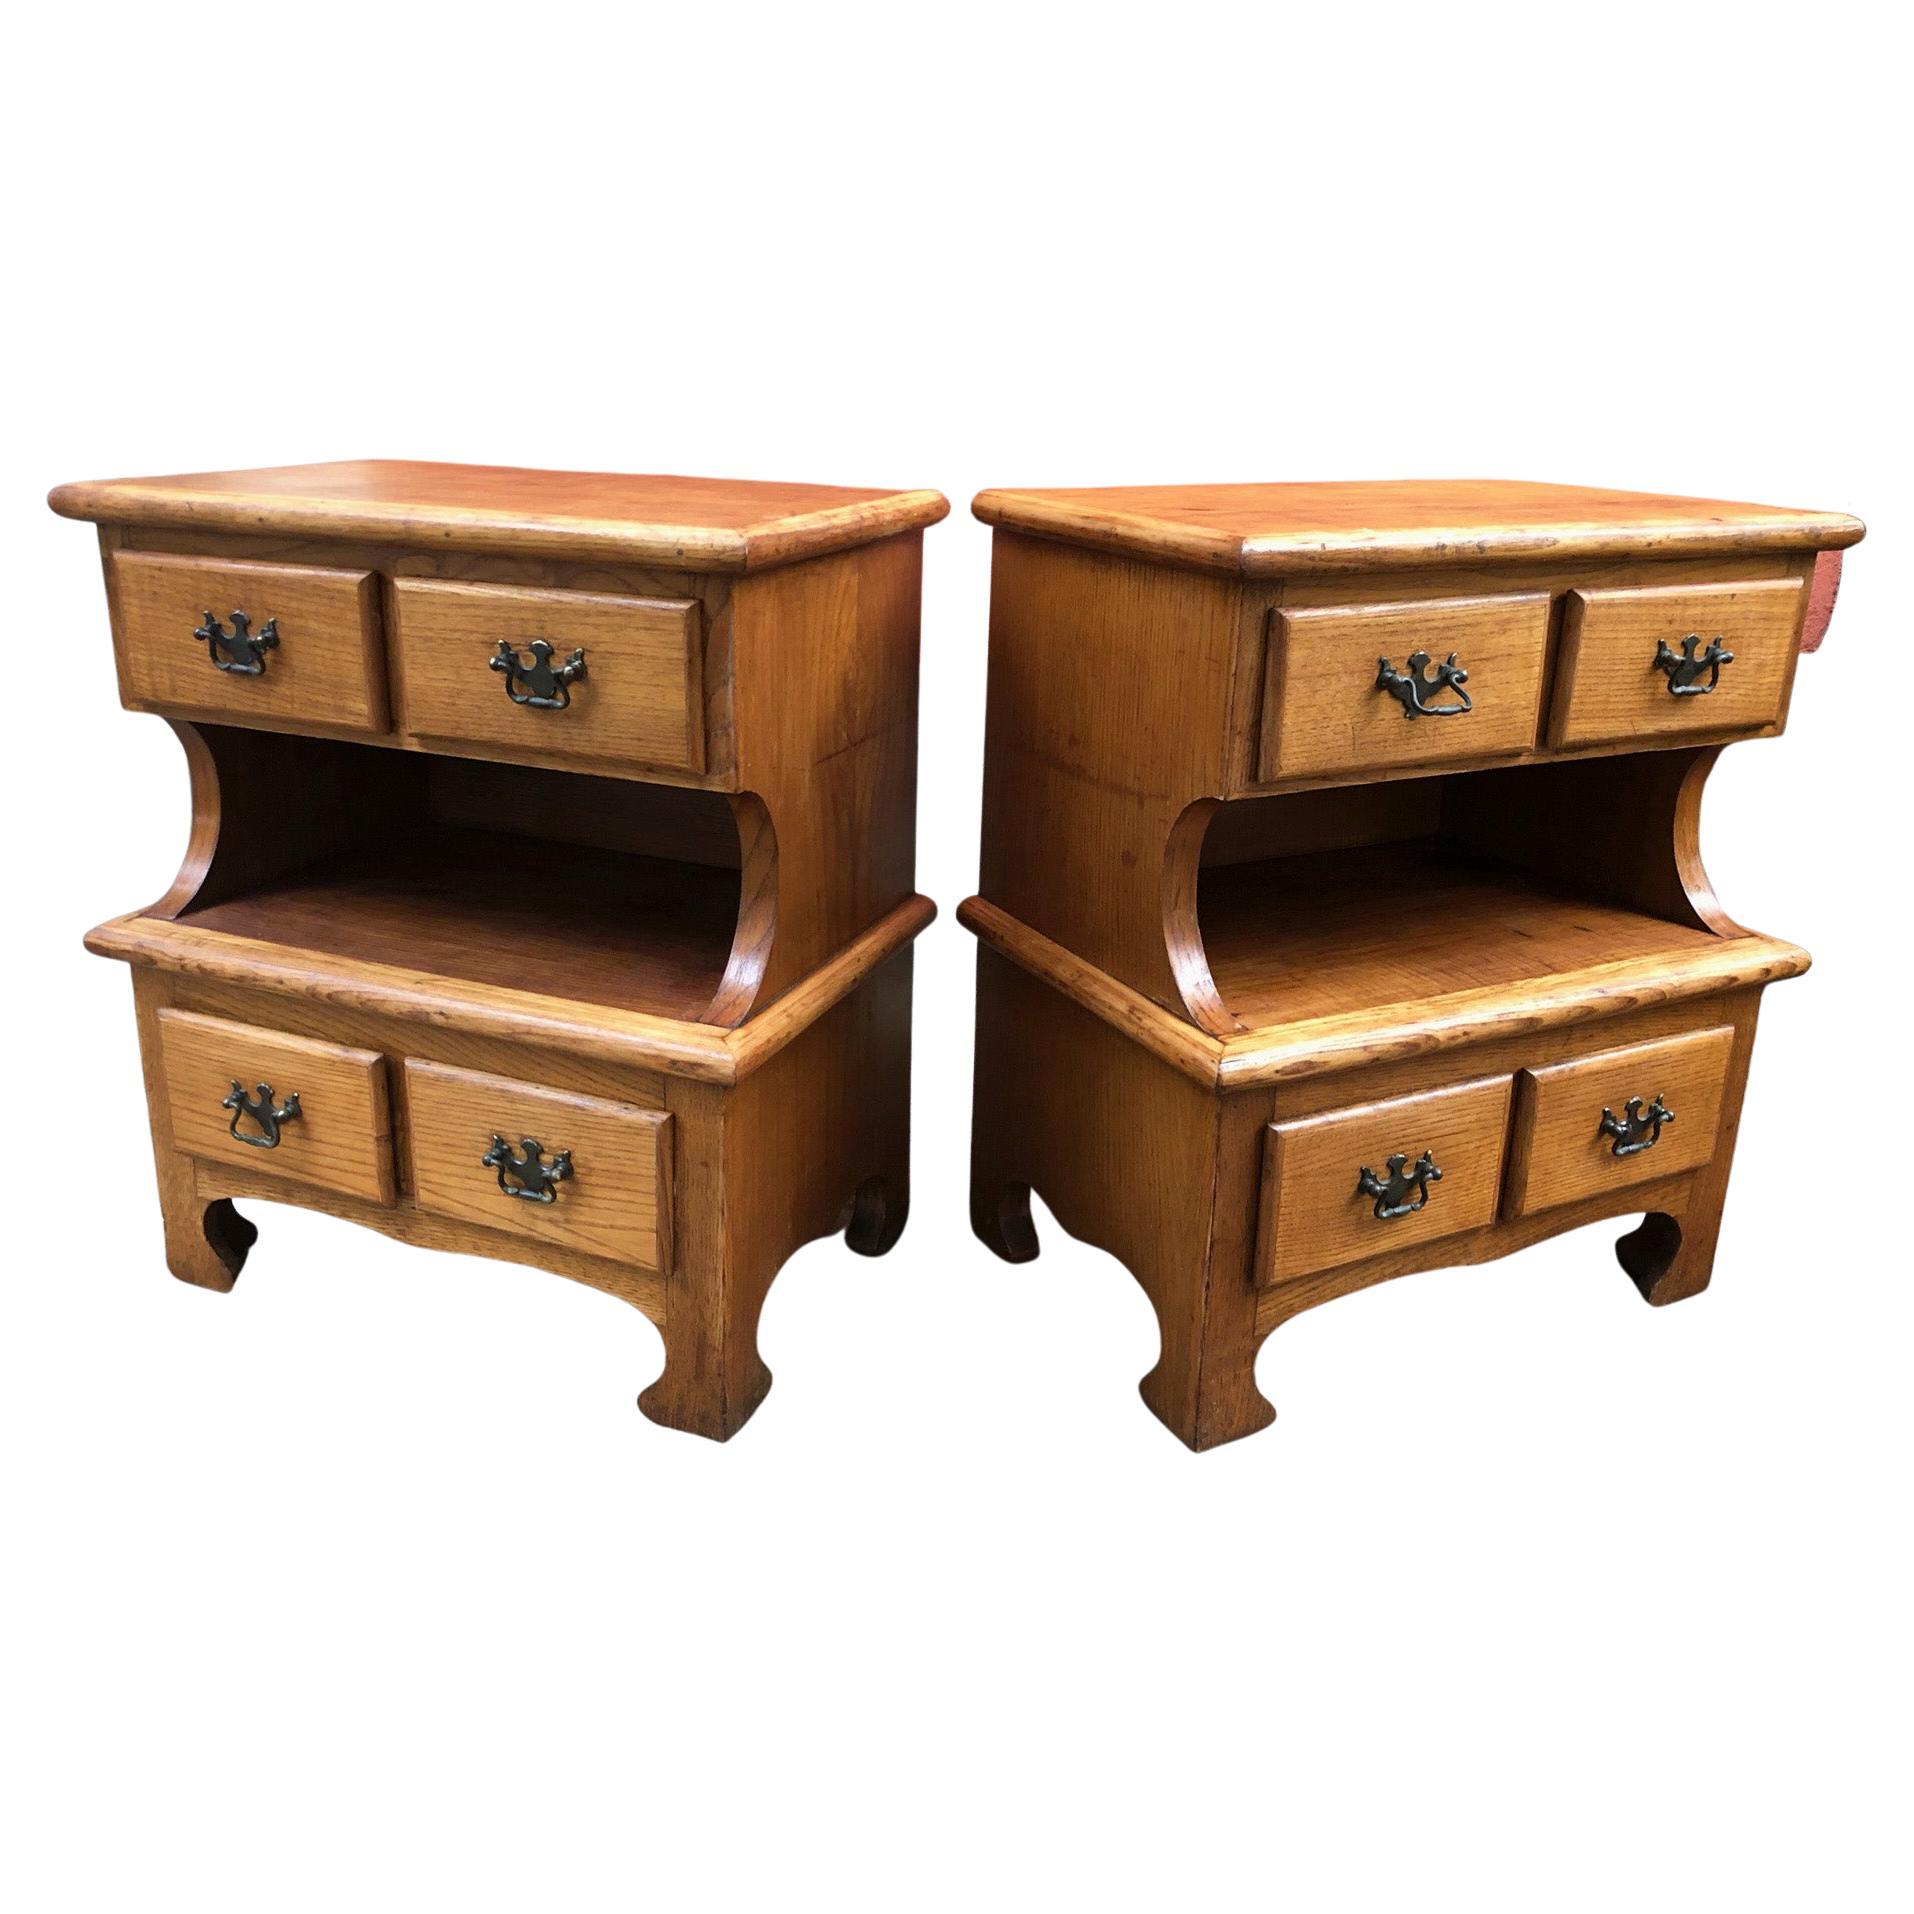 20th Pair of Italian Night Stands in Chestnut with Four Drawers Original Patina